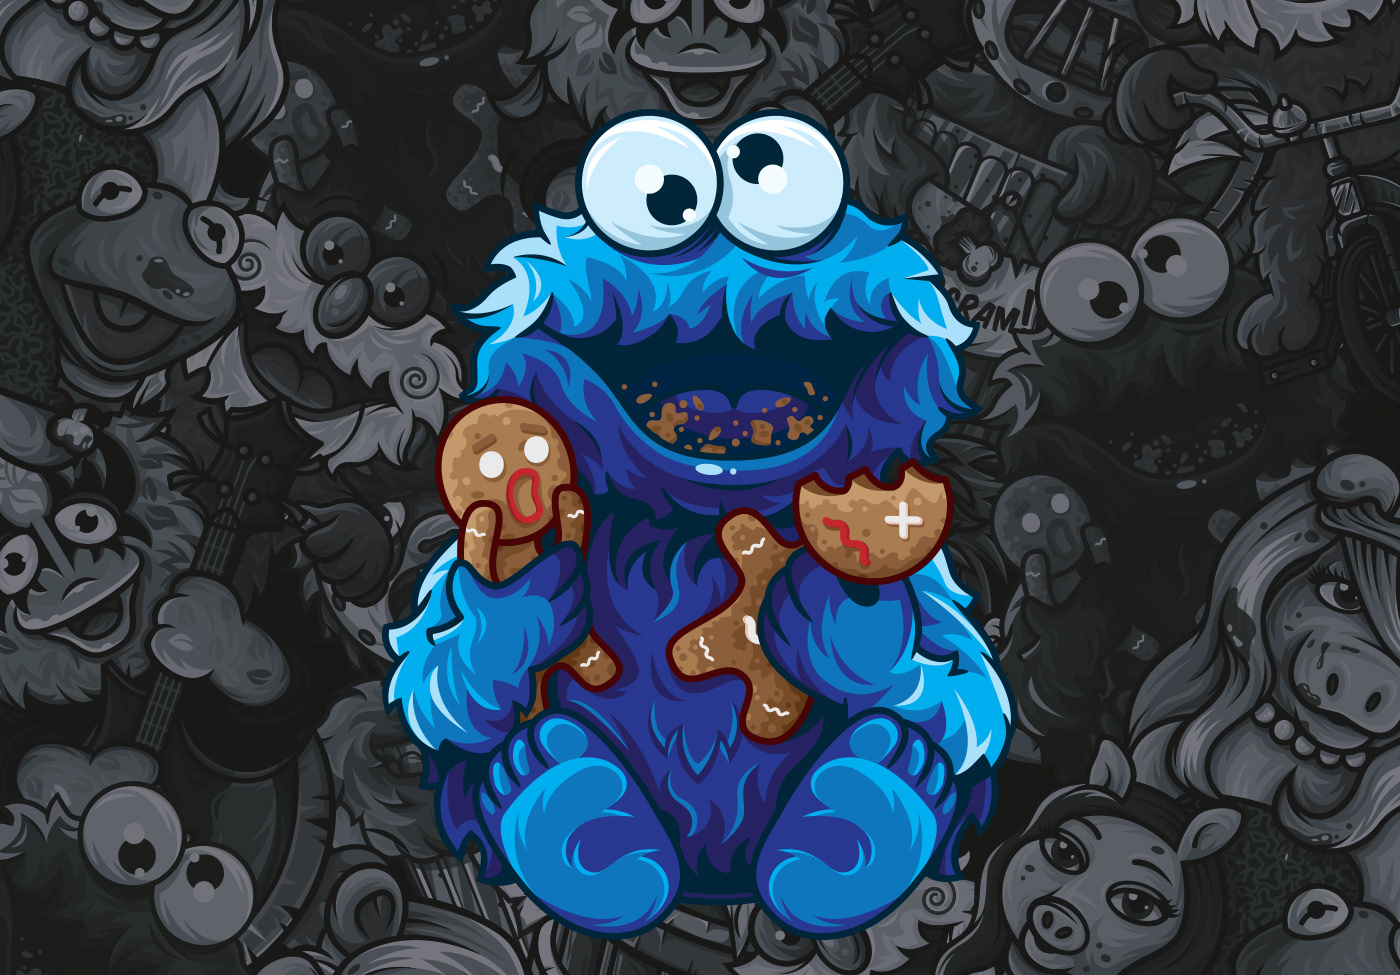 Muppets sesame street cookie monster kermit Character crossover stickers co...